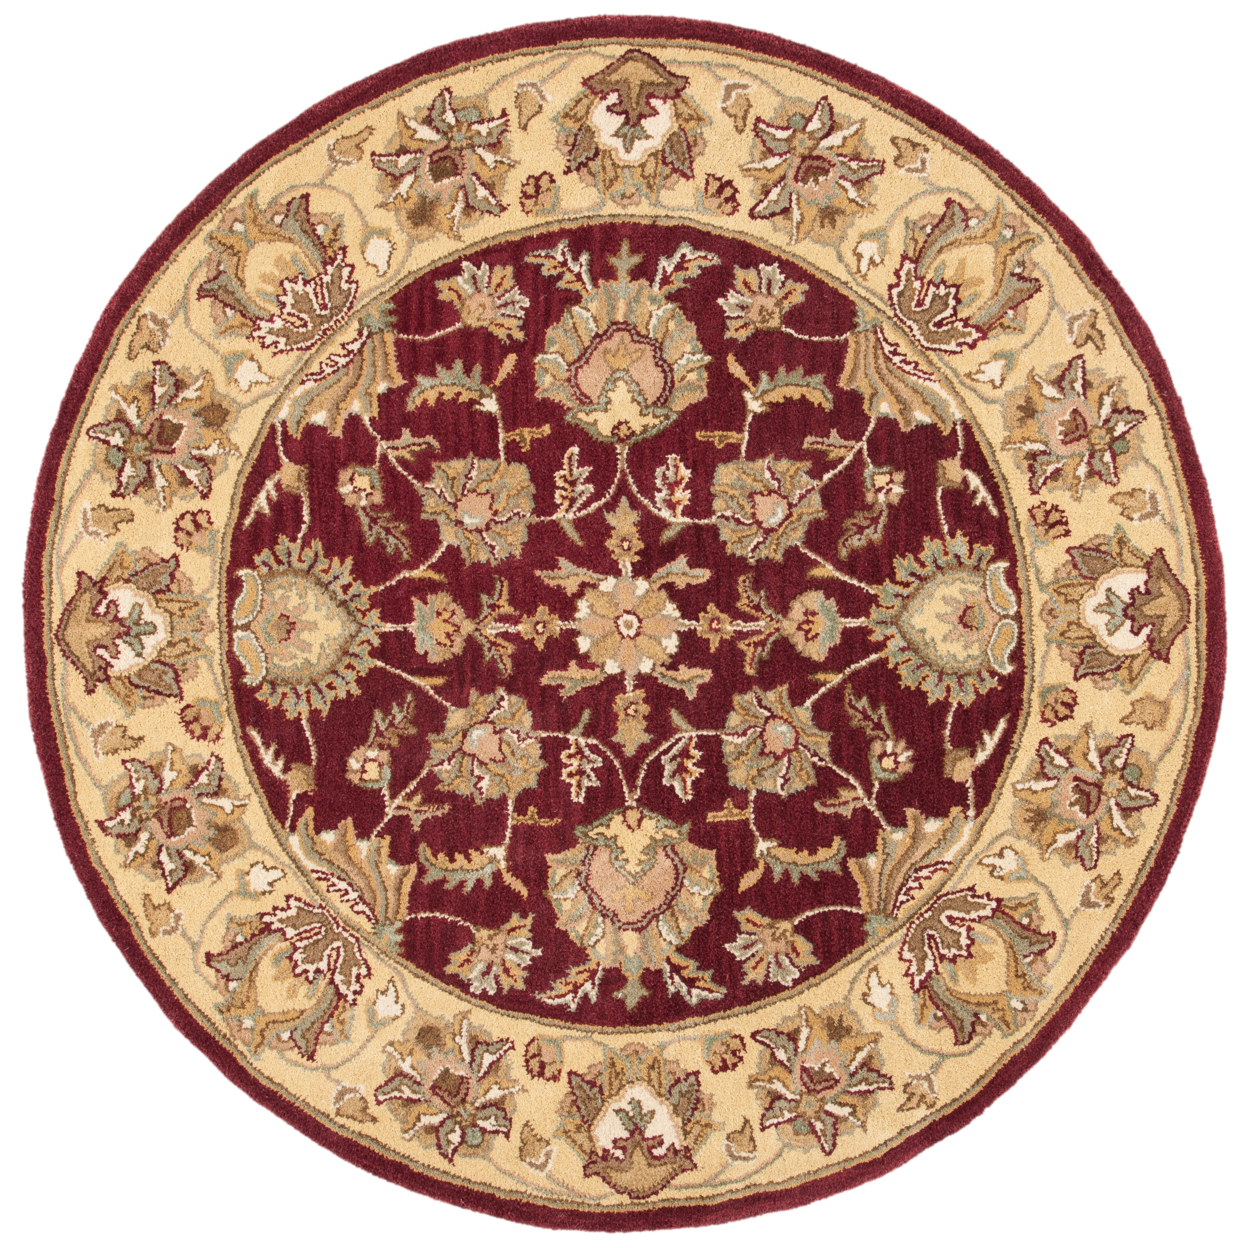 SAFAVIEH Heritage Regis Traditional Wool Area Rug, Red/Gold, 5' x 8' - image 4 of 10